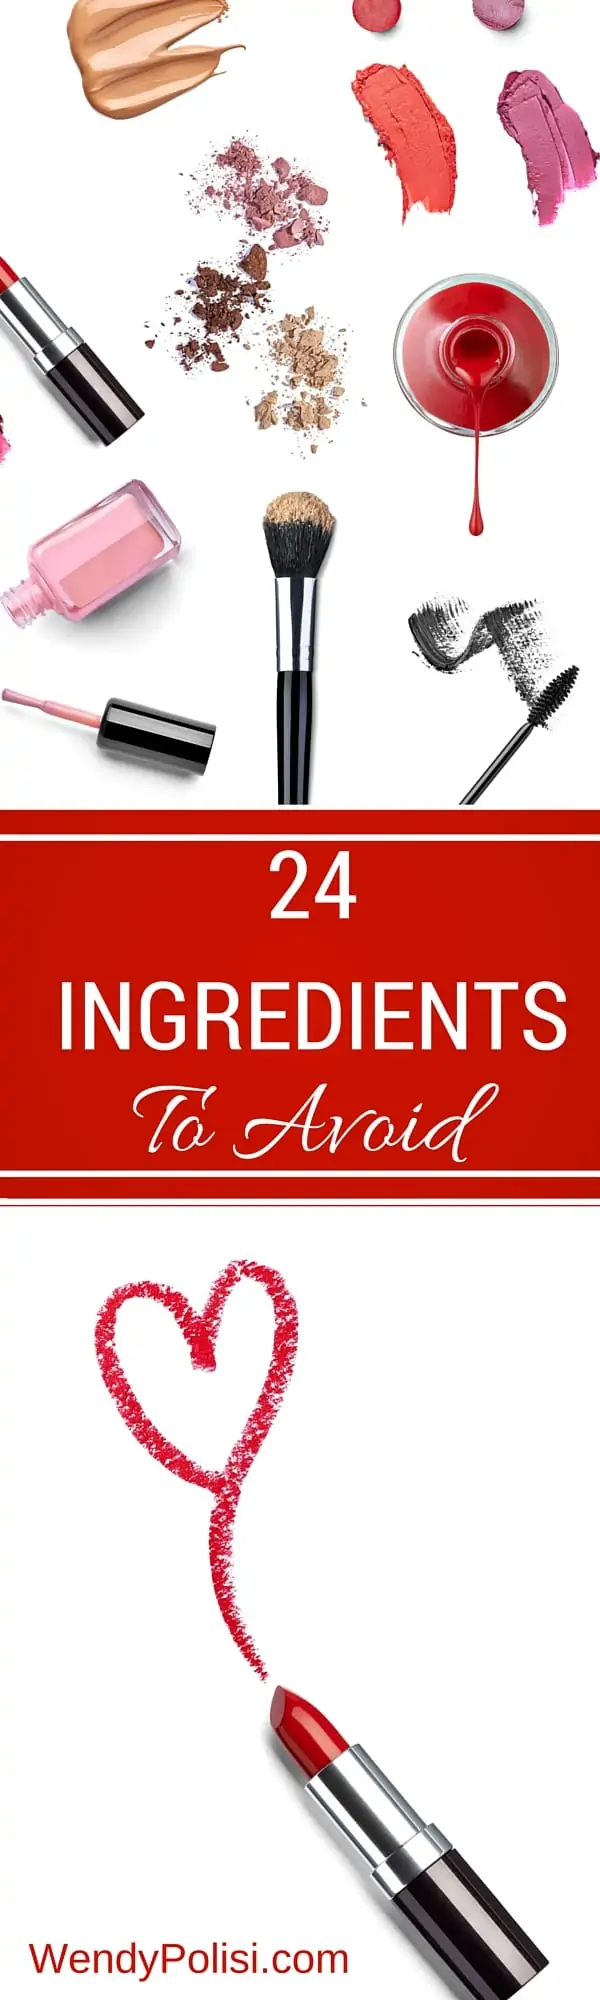 24 Skincare Ingredients to Avoid